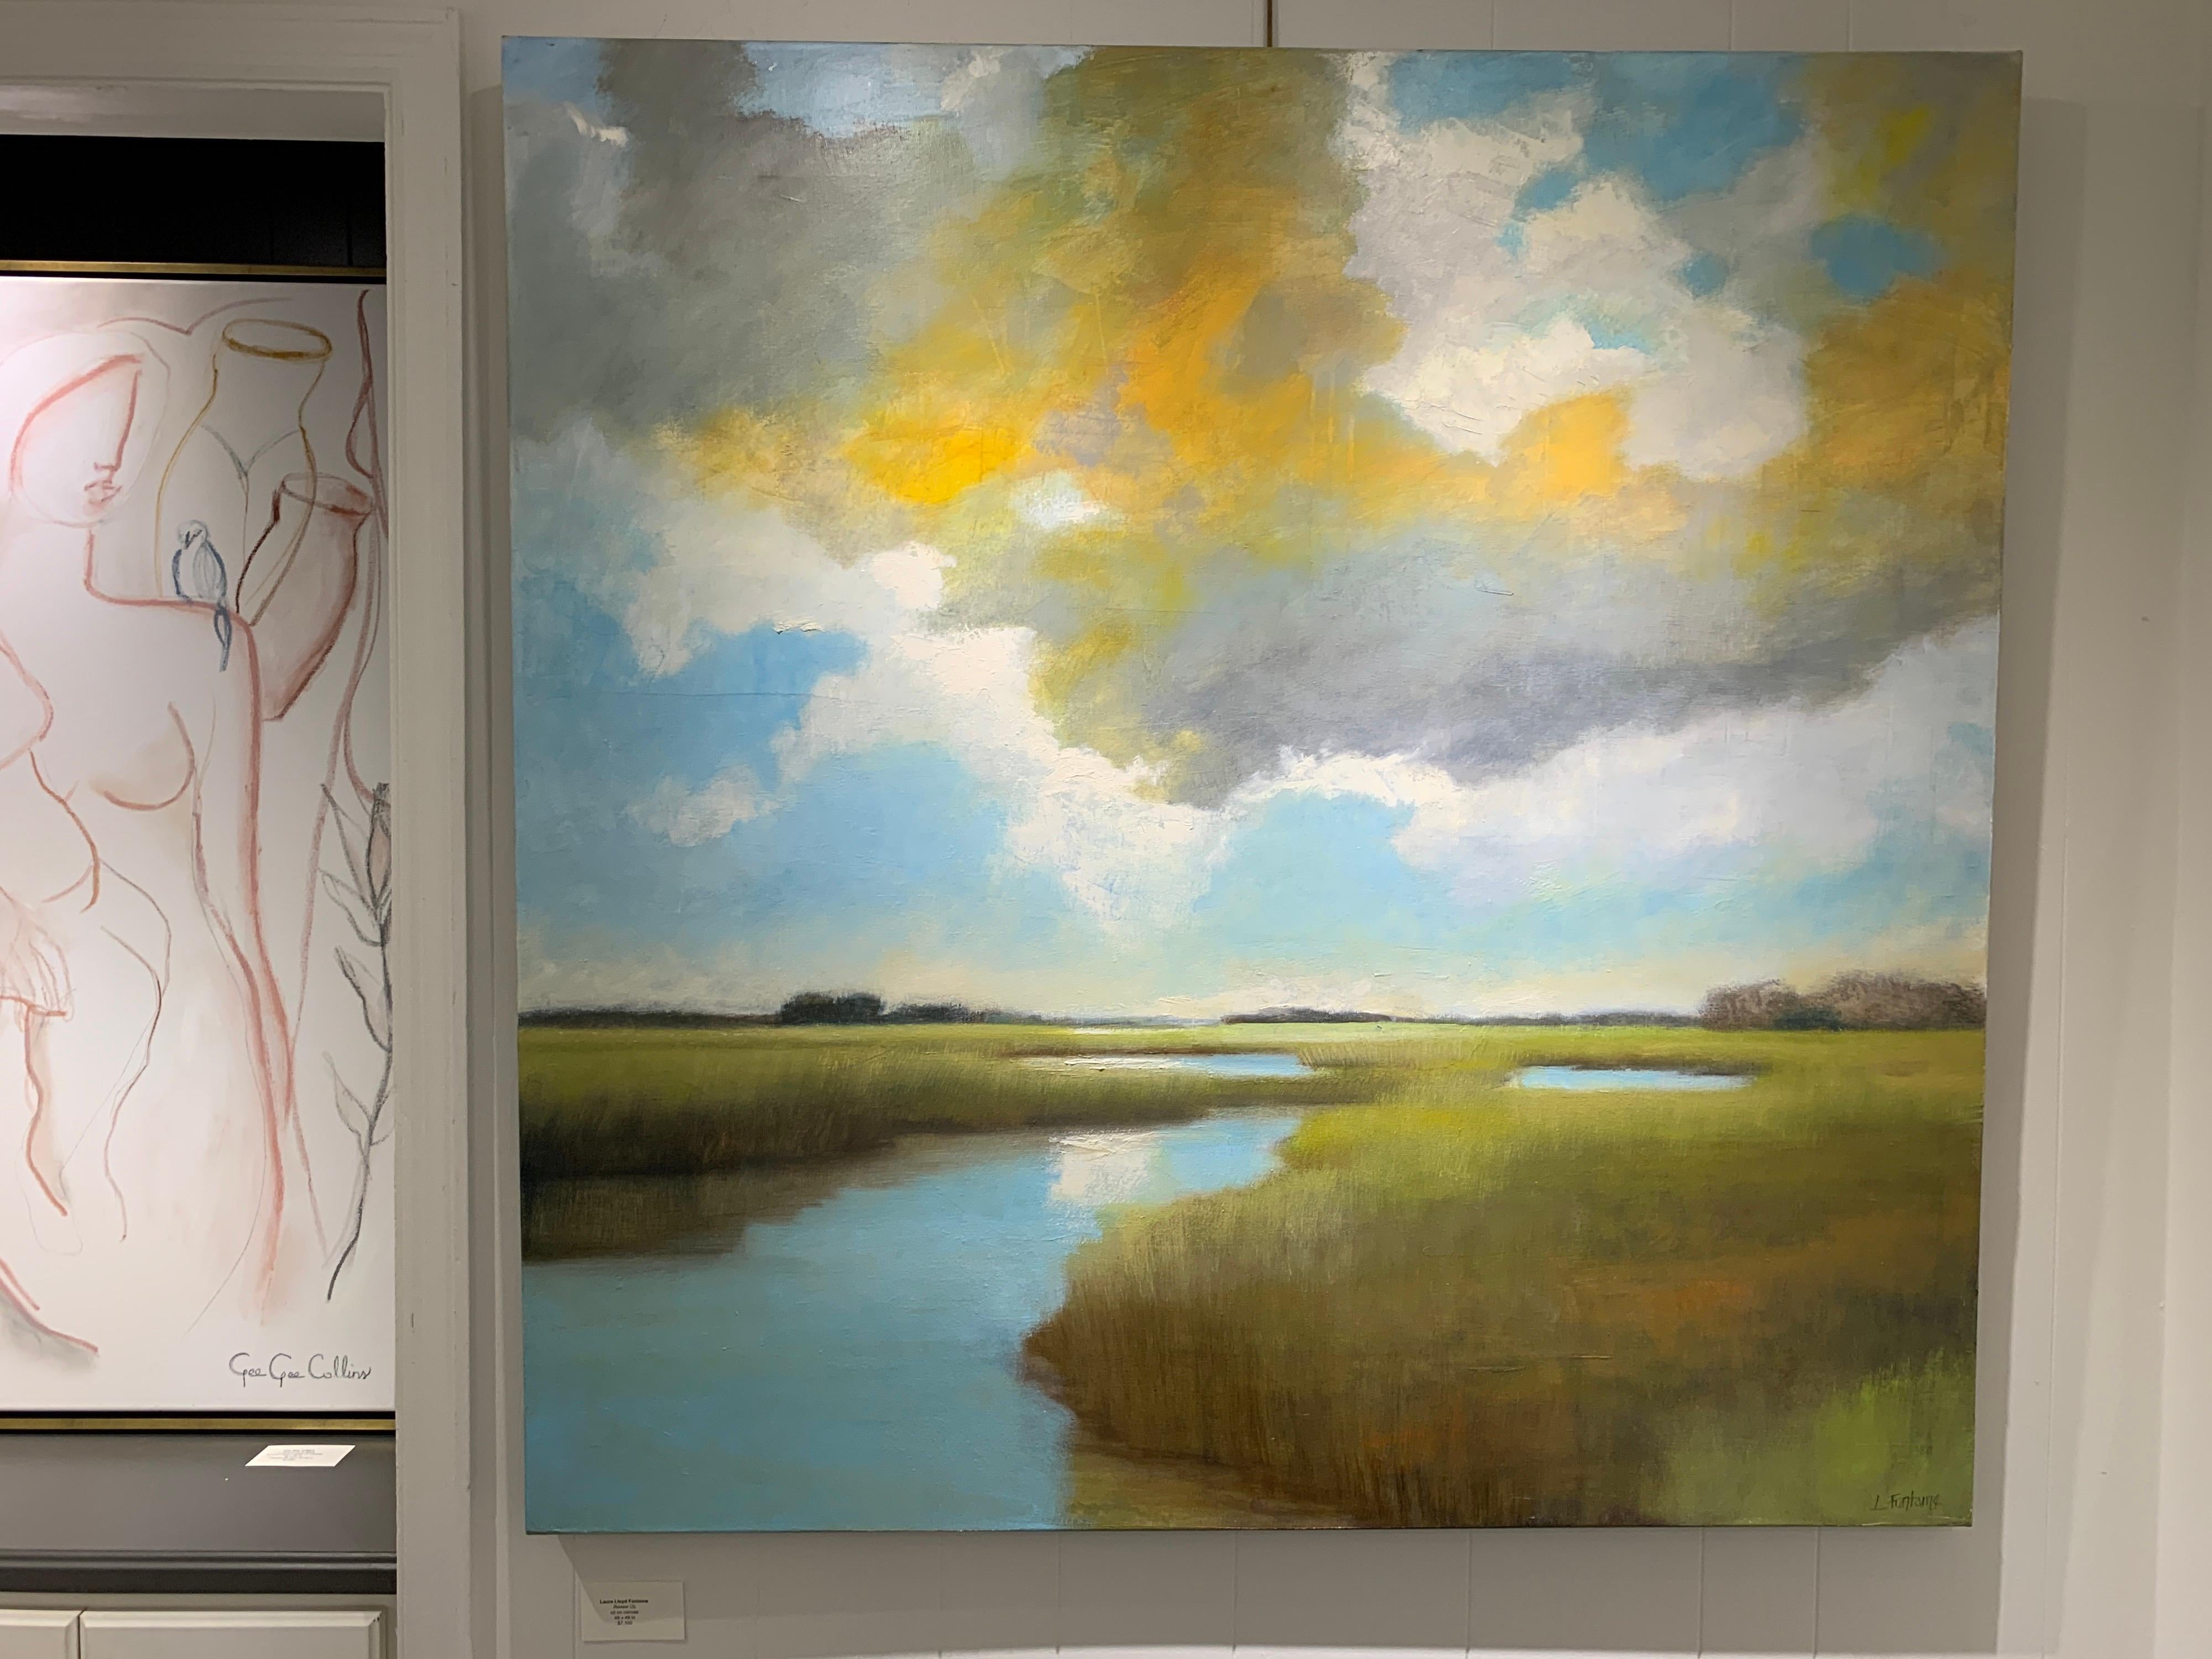 Laura Lloyd Fontaine's studio looks over the Lowcountry marsh of Charleston, S.C. When the tide is high, she paddles through the narrow creeks and marsh grass and into the Charleston Harbor. It is from this vantage point, close to the water in her